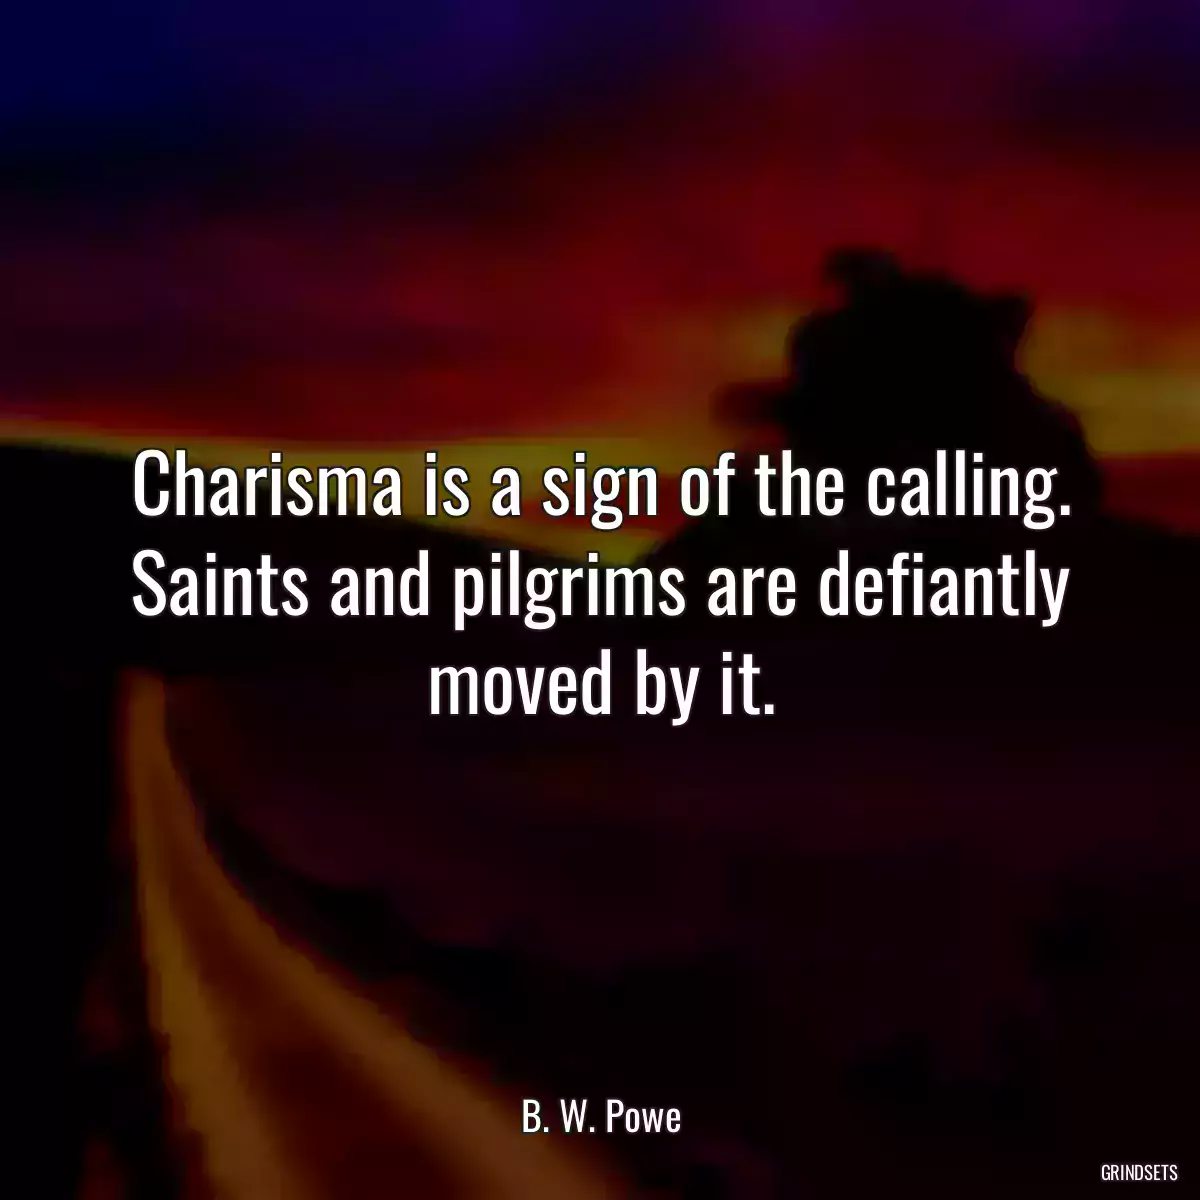 Charisma is a sign of the calling. Saints and pilgrims are defiantly moved by it.